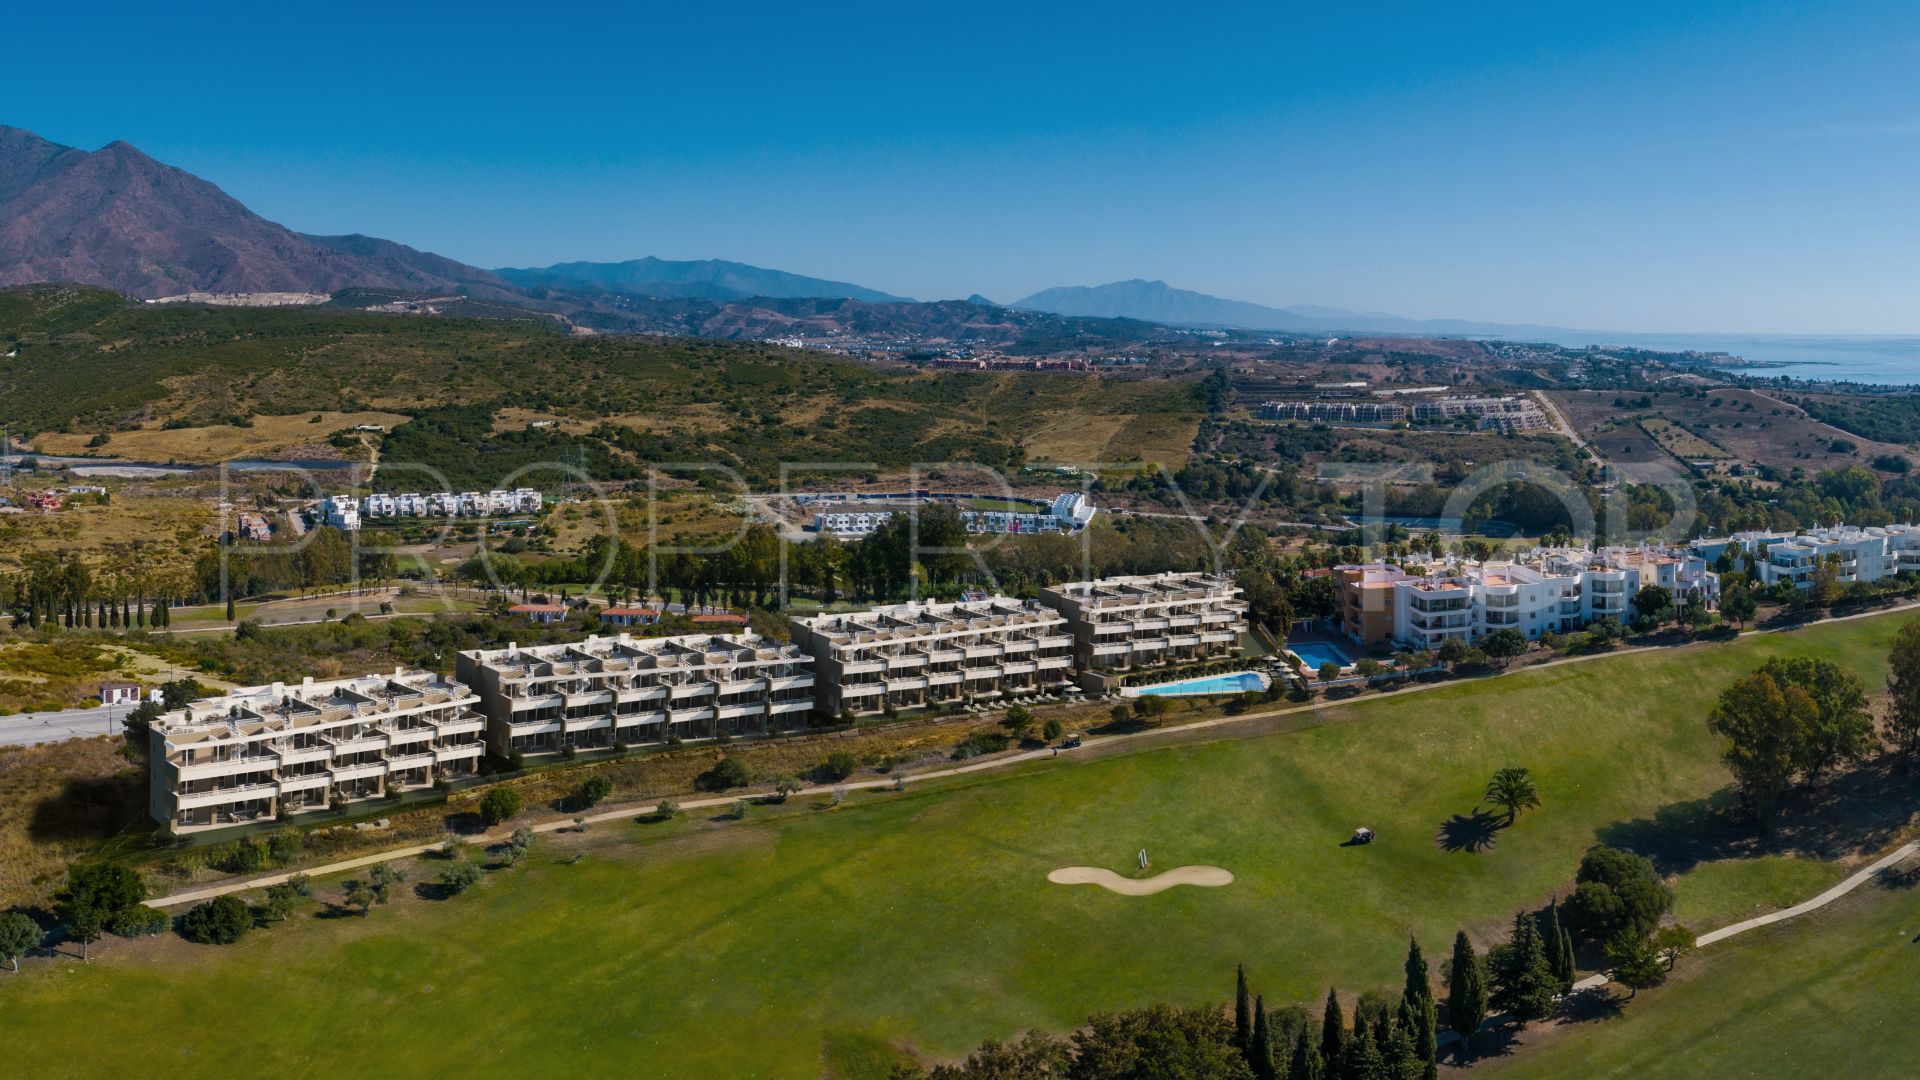 Ground floor apartment with 3 bedrooms for sale in Estepona Golf